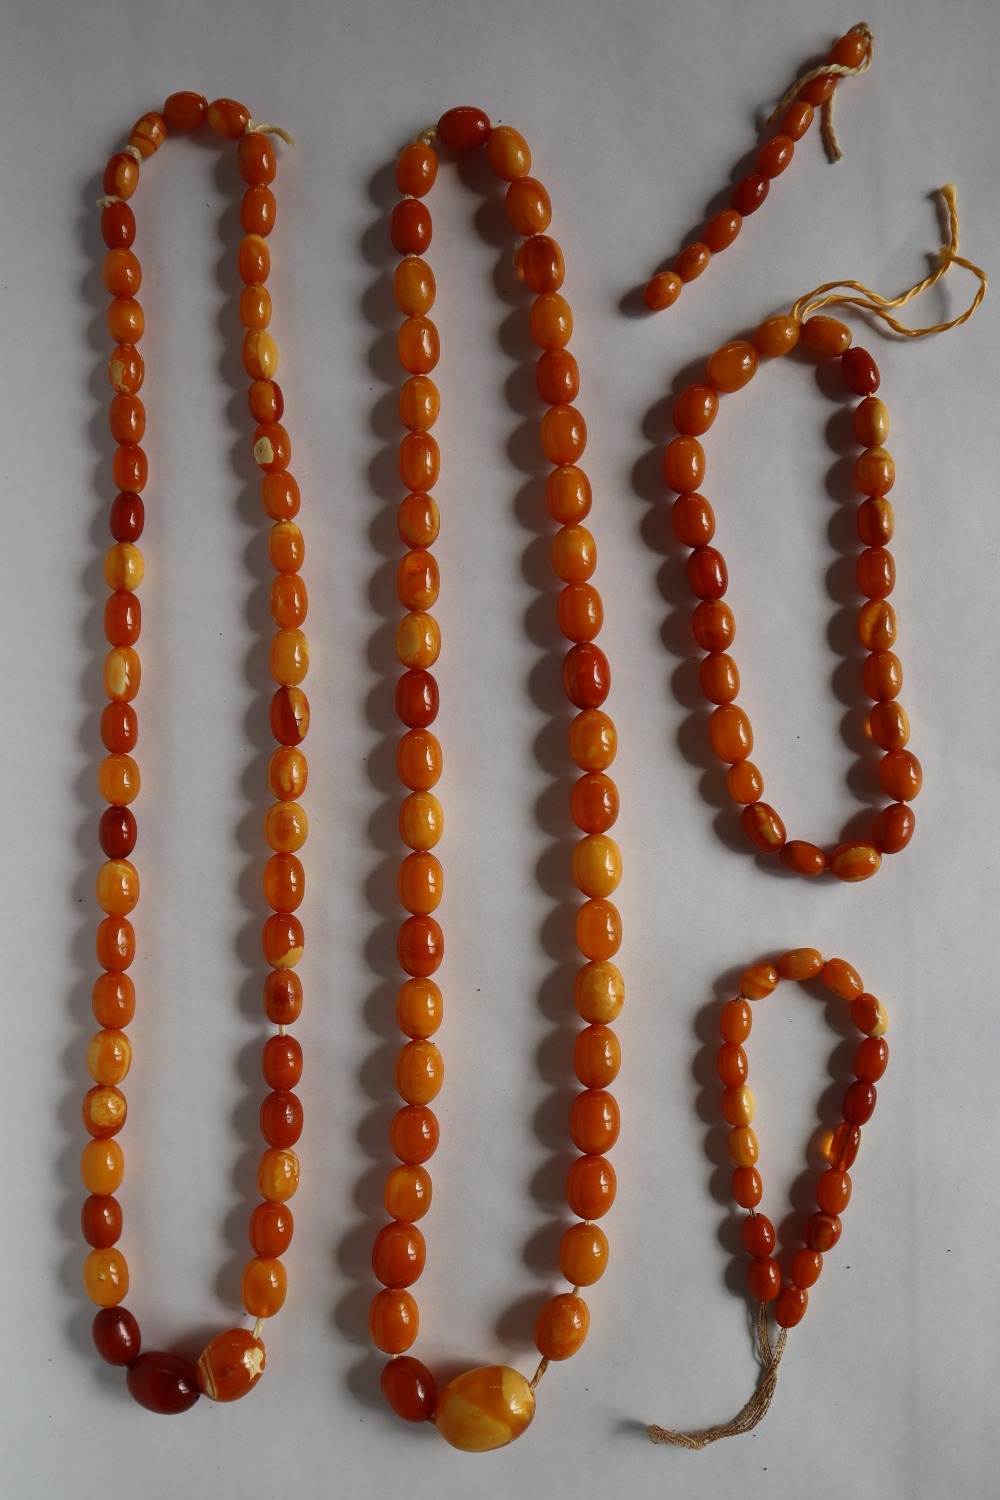 An amber bead necklace with graduated beads, - Image 3 of 3